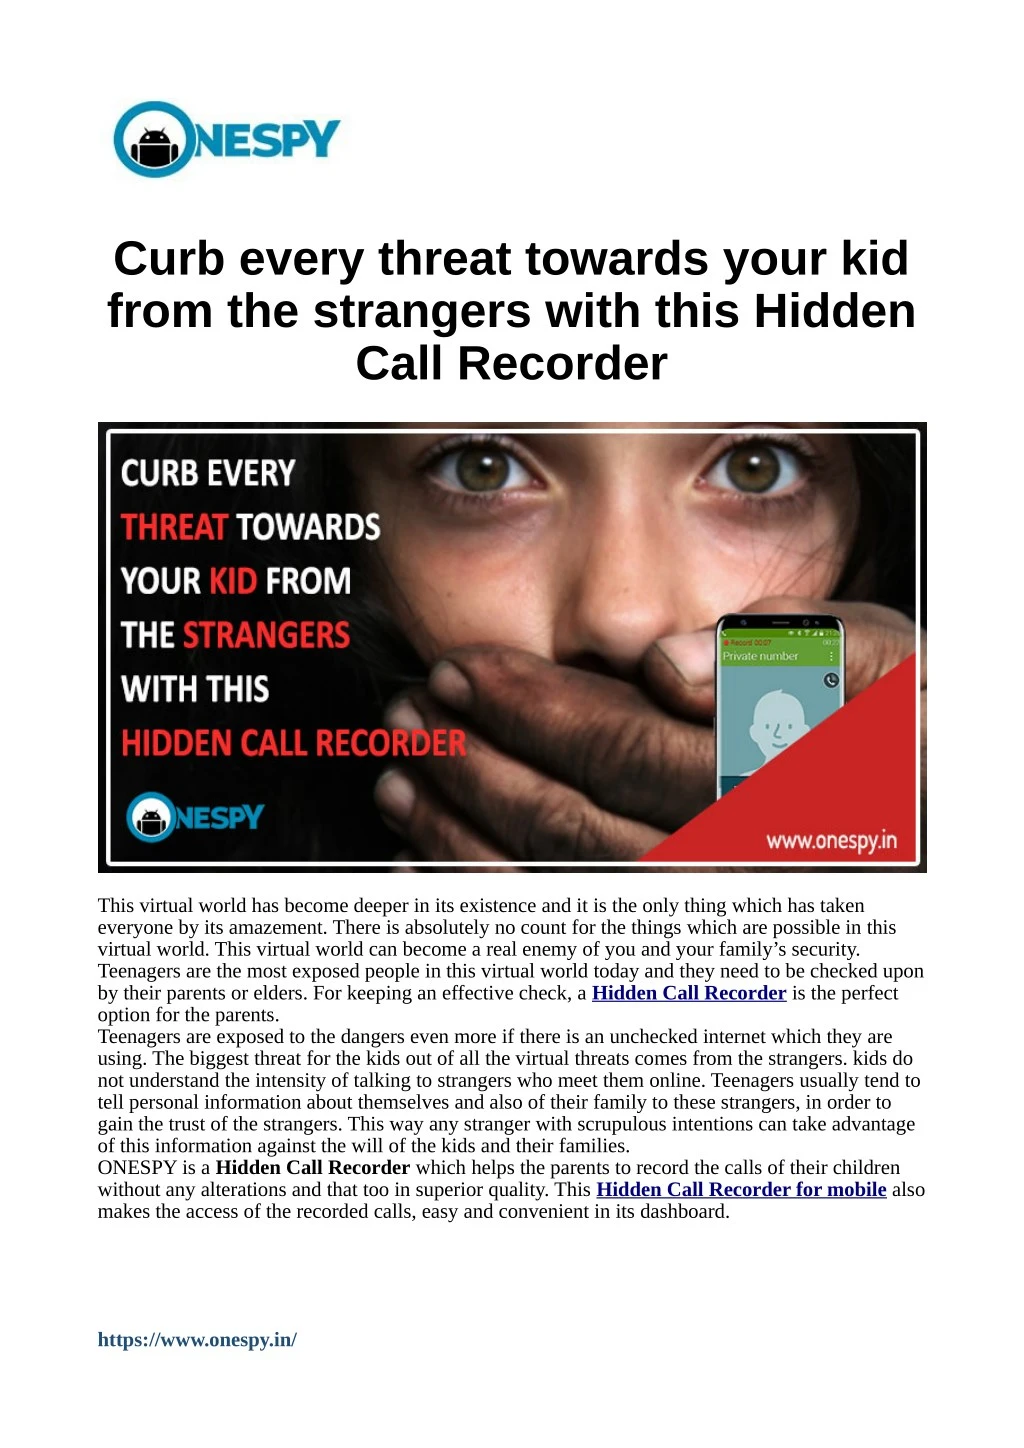 curb every threat towards your kid from